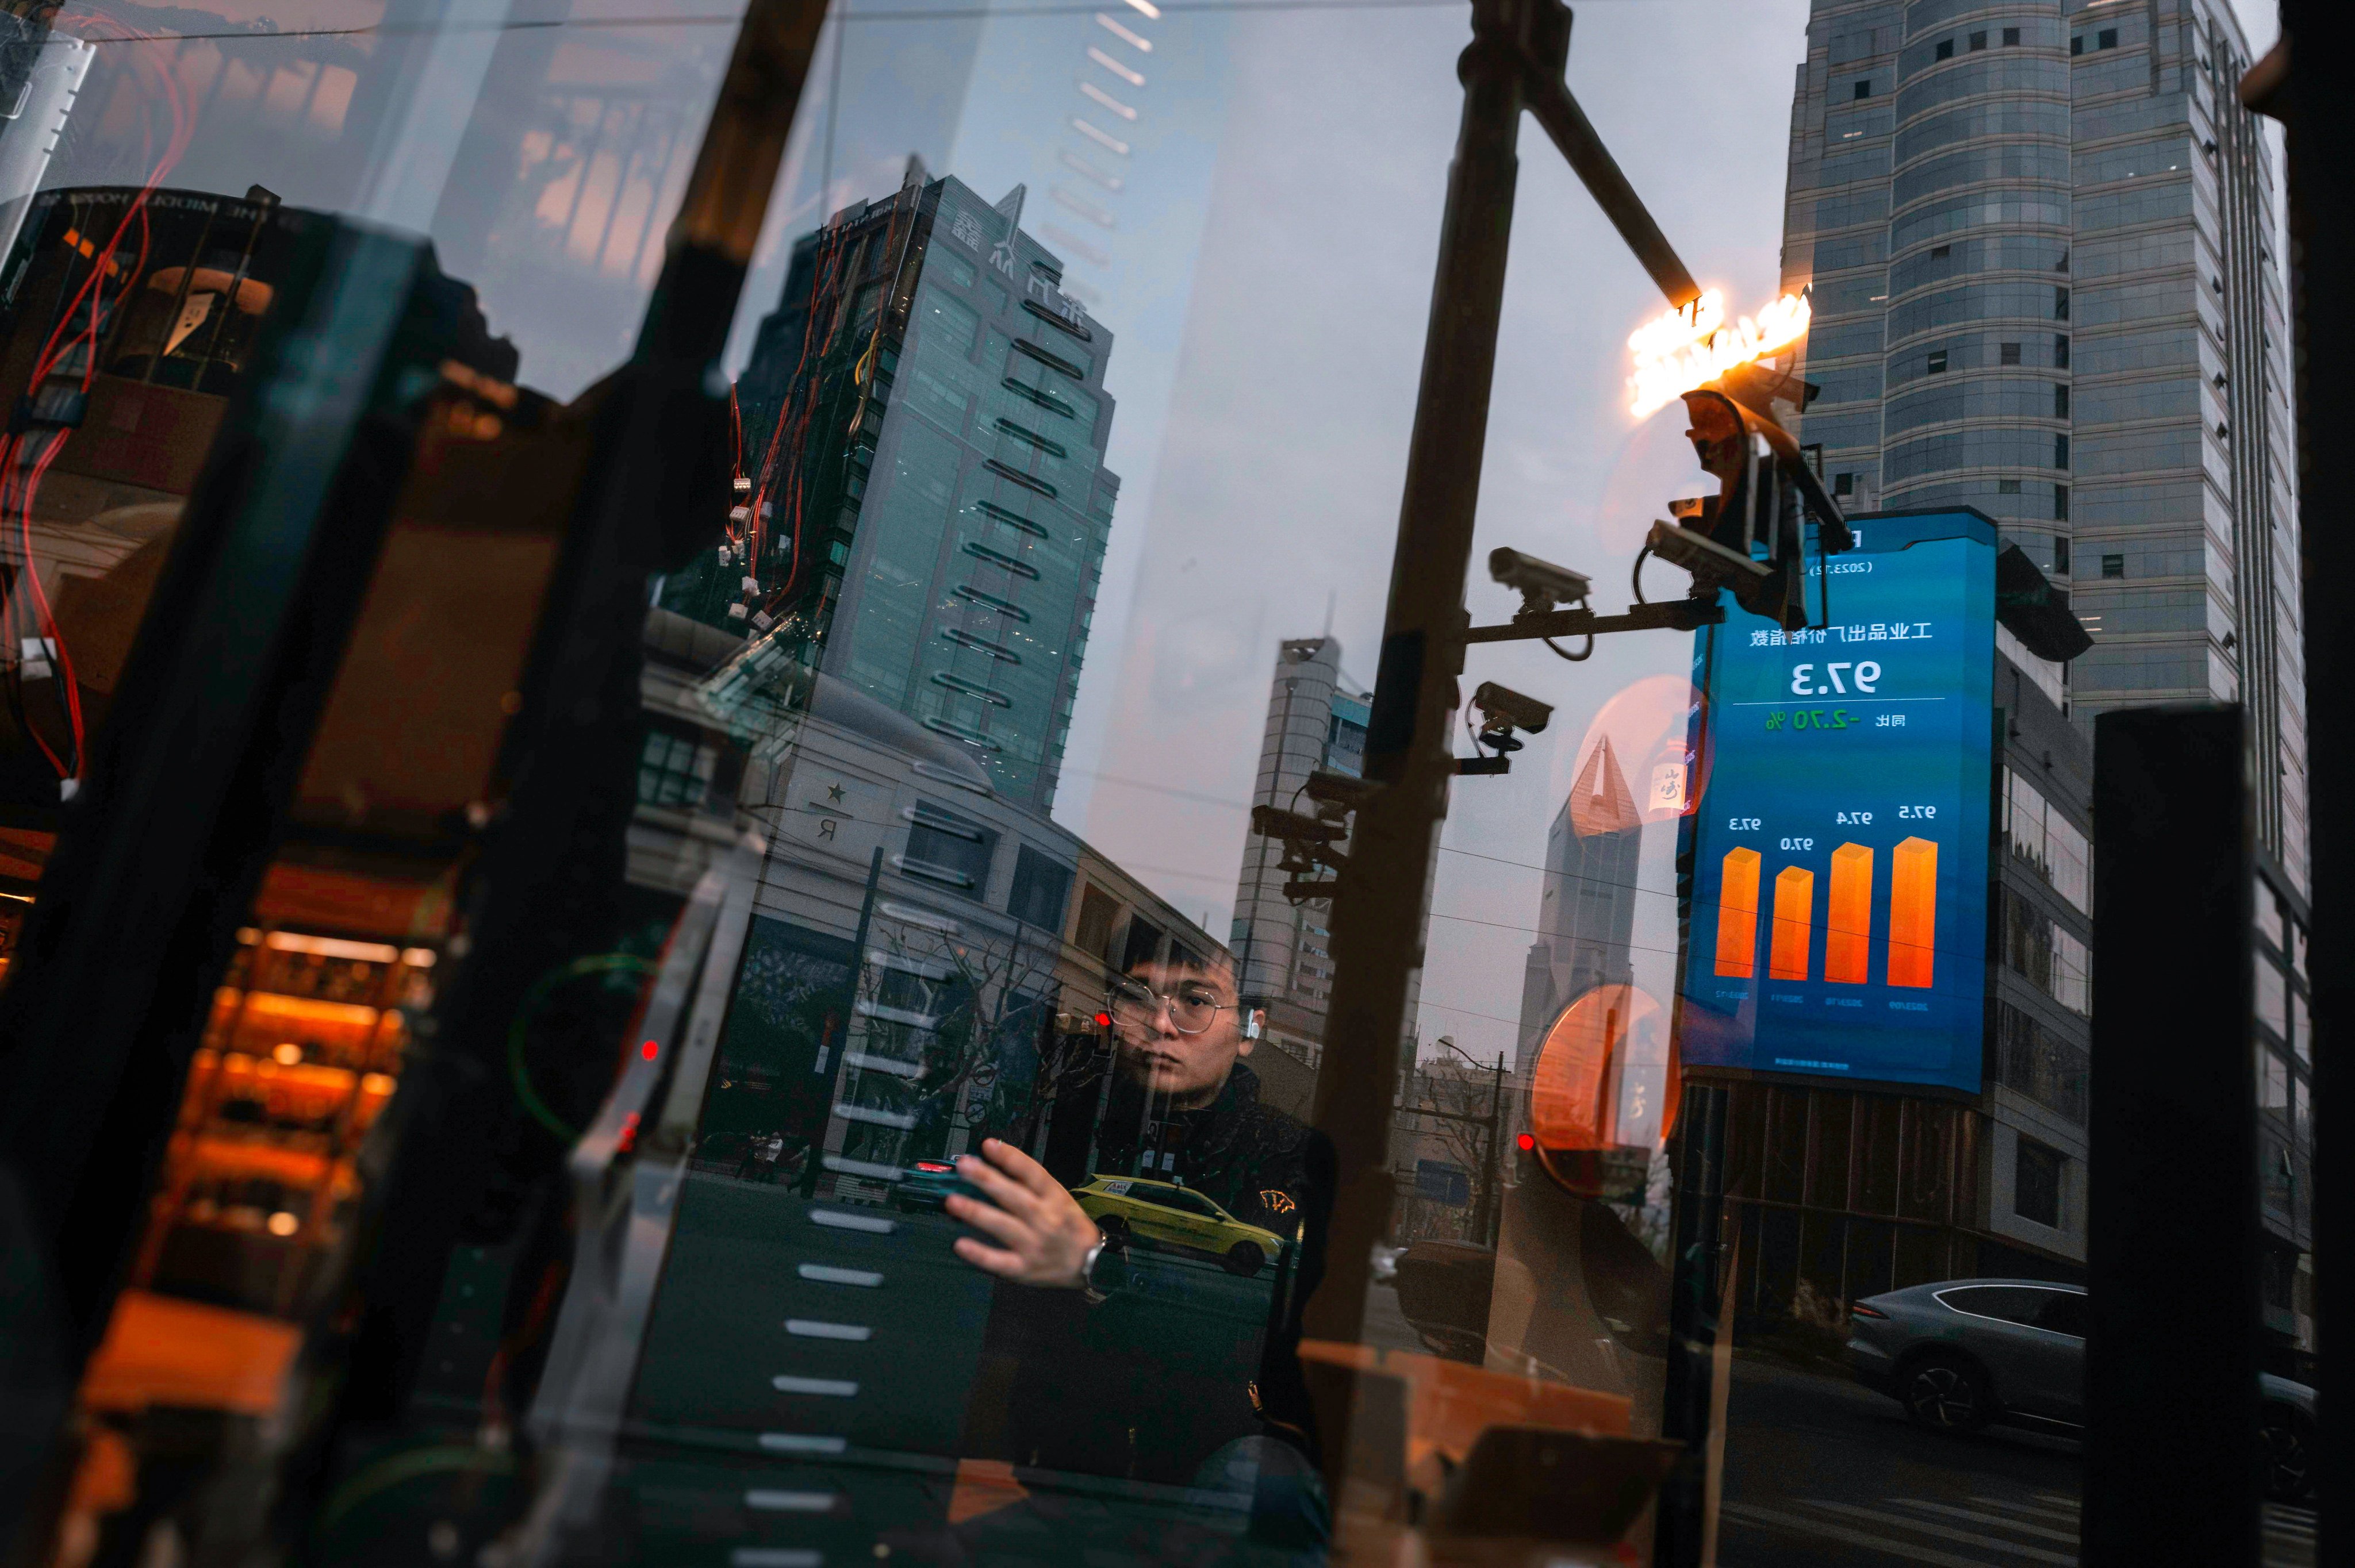 A large screen showing the latest stock exchange and economic data is reflected in a shop window in Shanghai. Foreign buying has been concentrated in consumer and financial stocks this year, Everbright Securities says. Photo: EPA-EFE